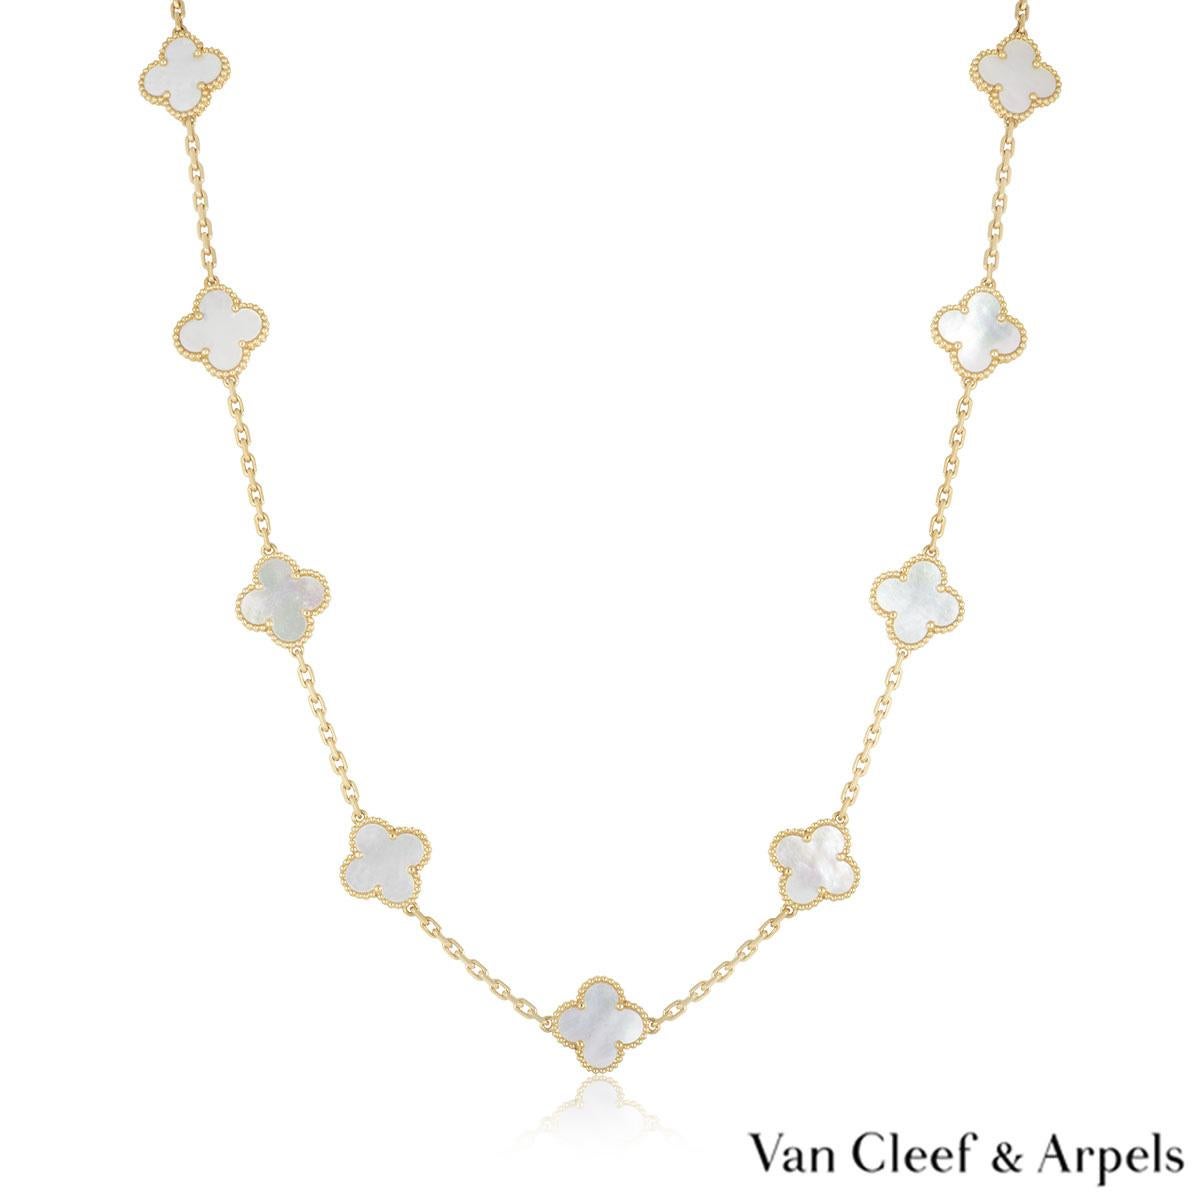 An 18k yellow gold necklace from the Vintage Alhambra collection by Van Cleef & Arpels. The necklace features 20 iconic 4 leaf clover motifs, each set with a beaded edge and a mother of pearl inlay, set throughout the length of the chain. The trace